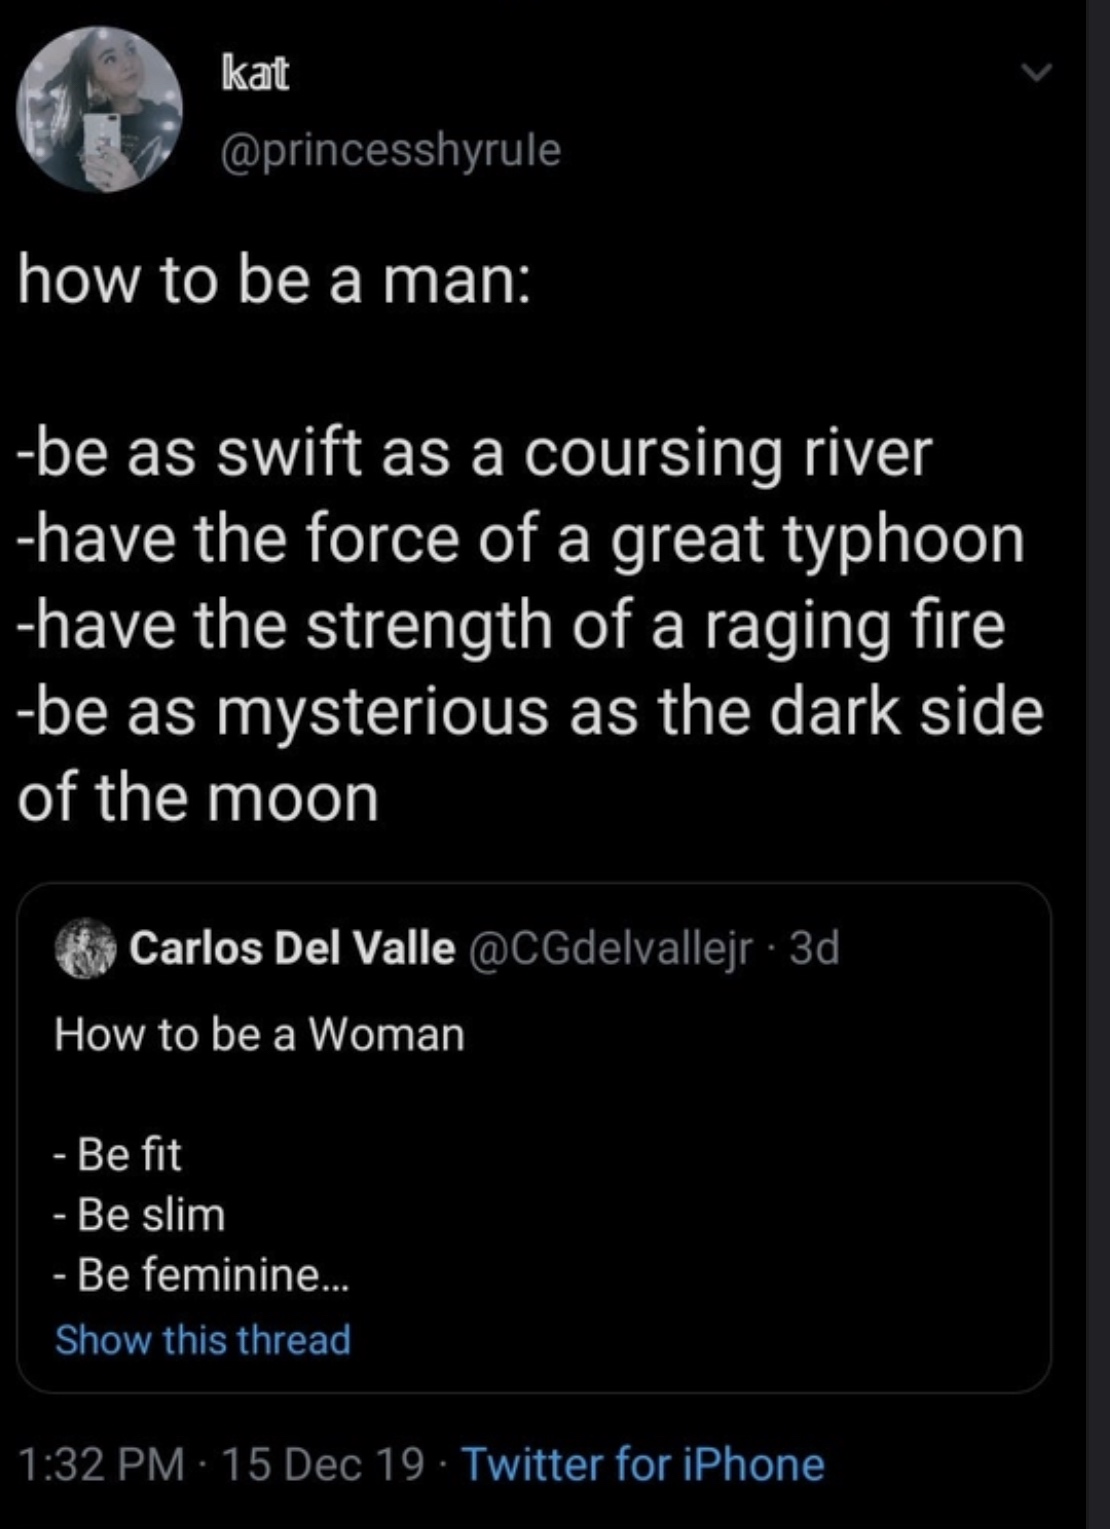 screenshot - kat how to be a man be as swift as a coursing river have the force of a great typhoon have the strength of a raging fire be as mysterious as the dark side of the moon Carlos Del Valle 3d, How to be a Woman Be fit Be slim Be feminine... Show t